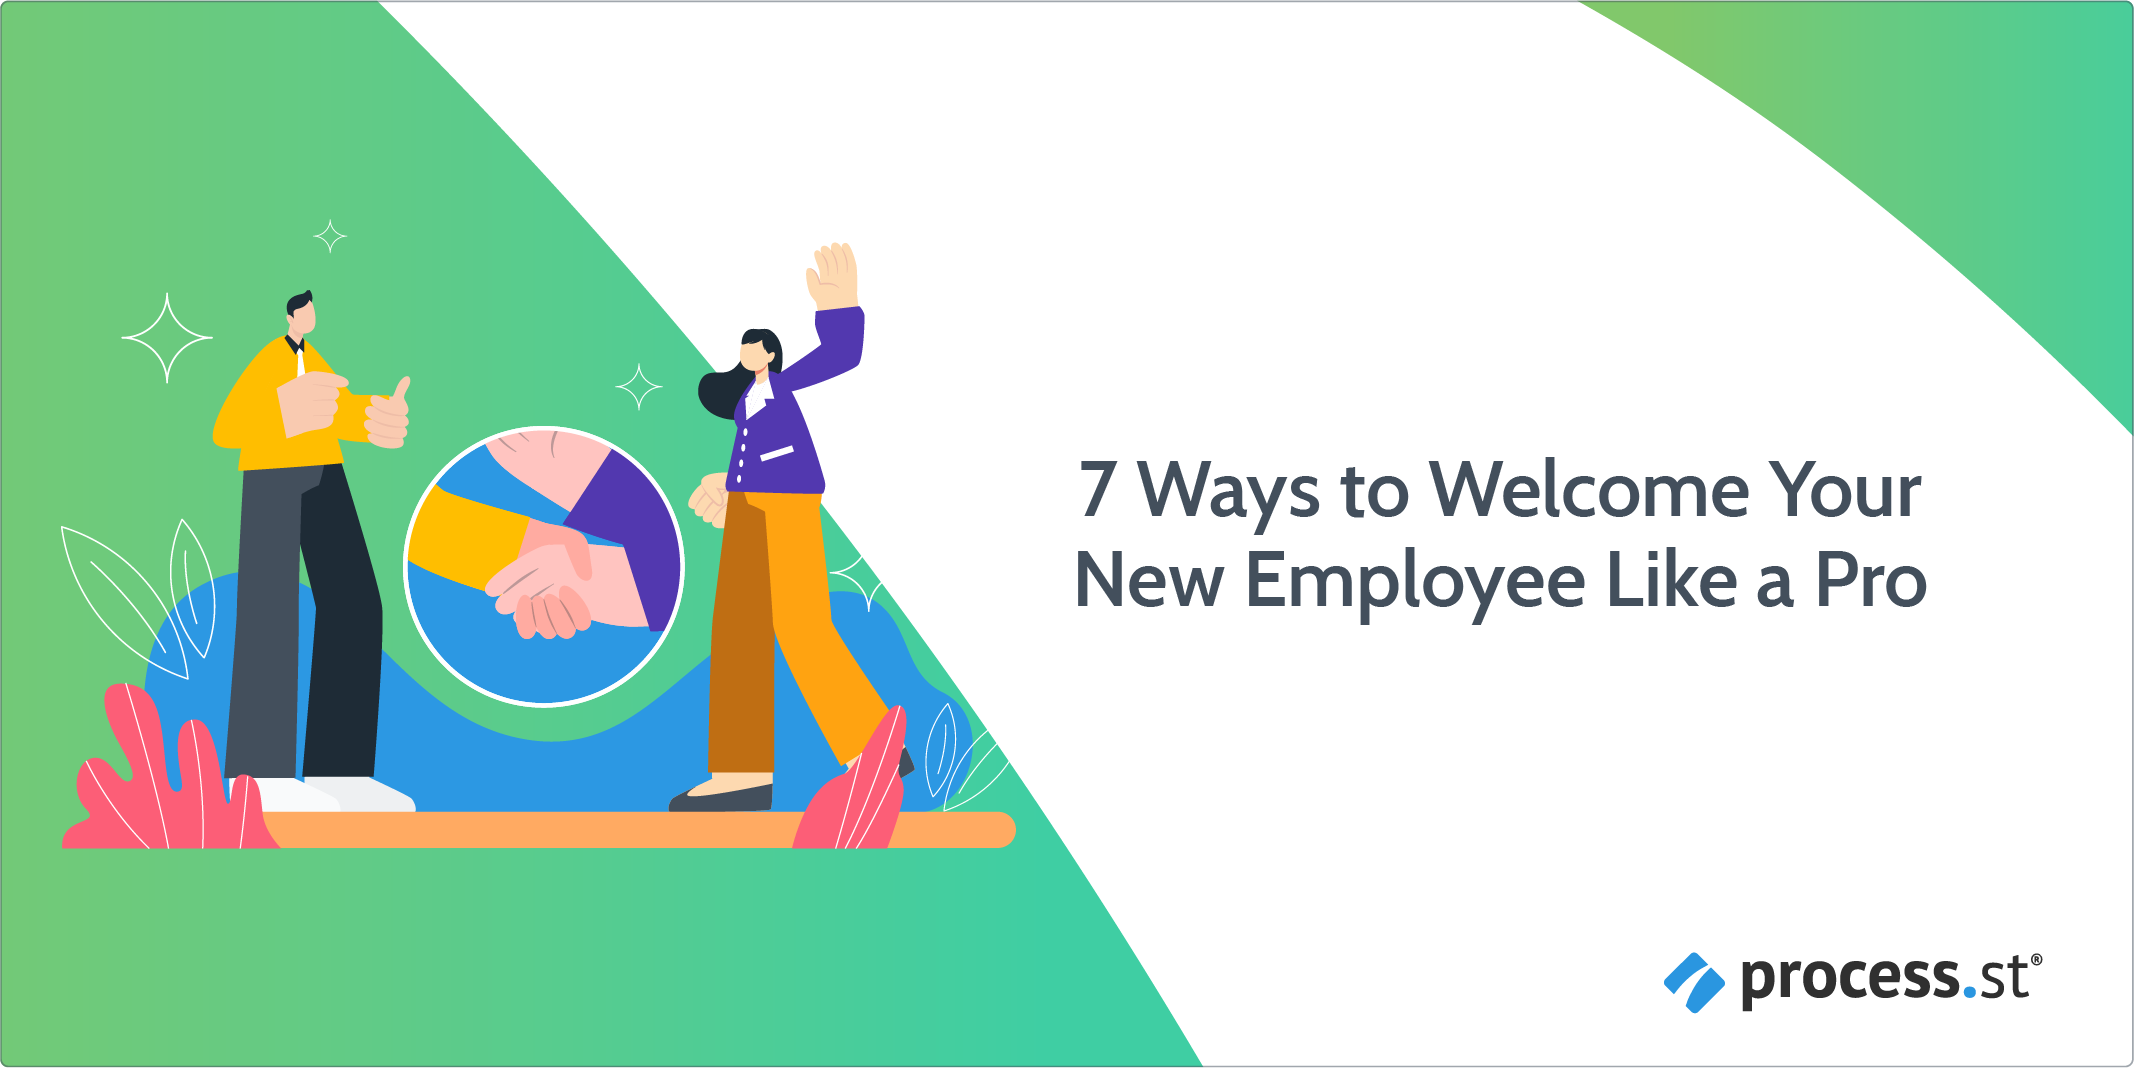 How to welcome a new employee: 7 ways